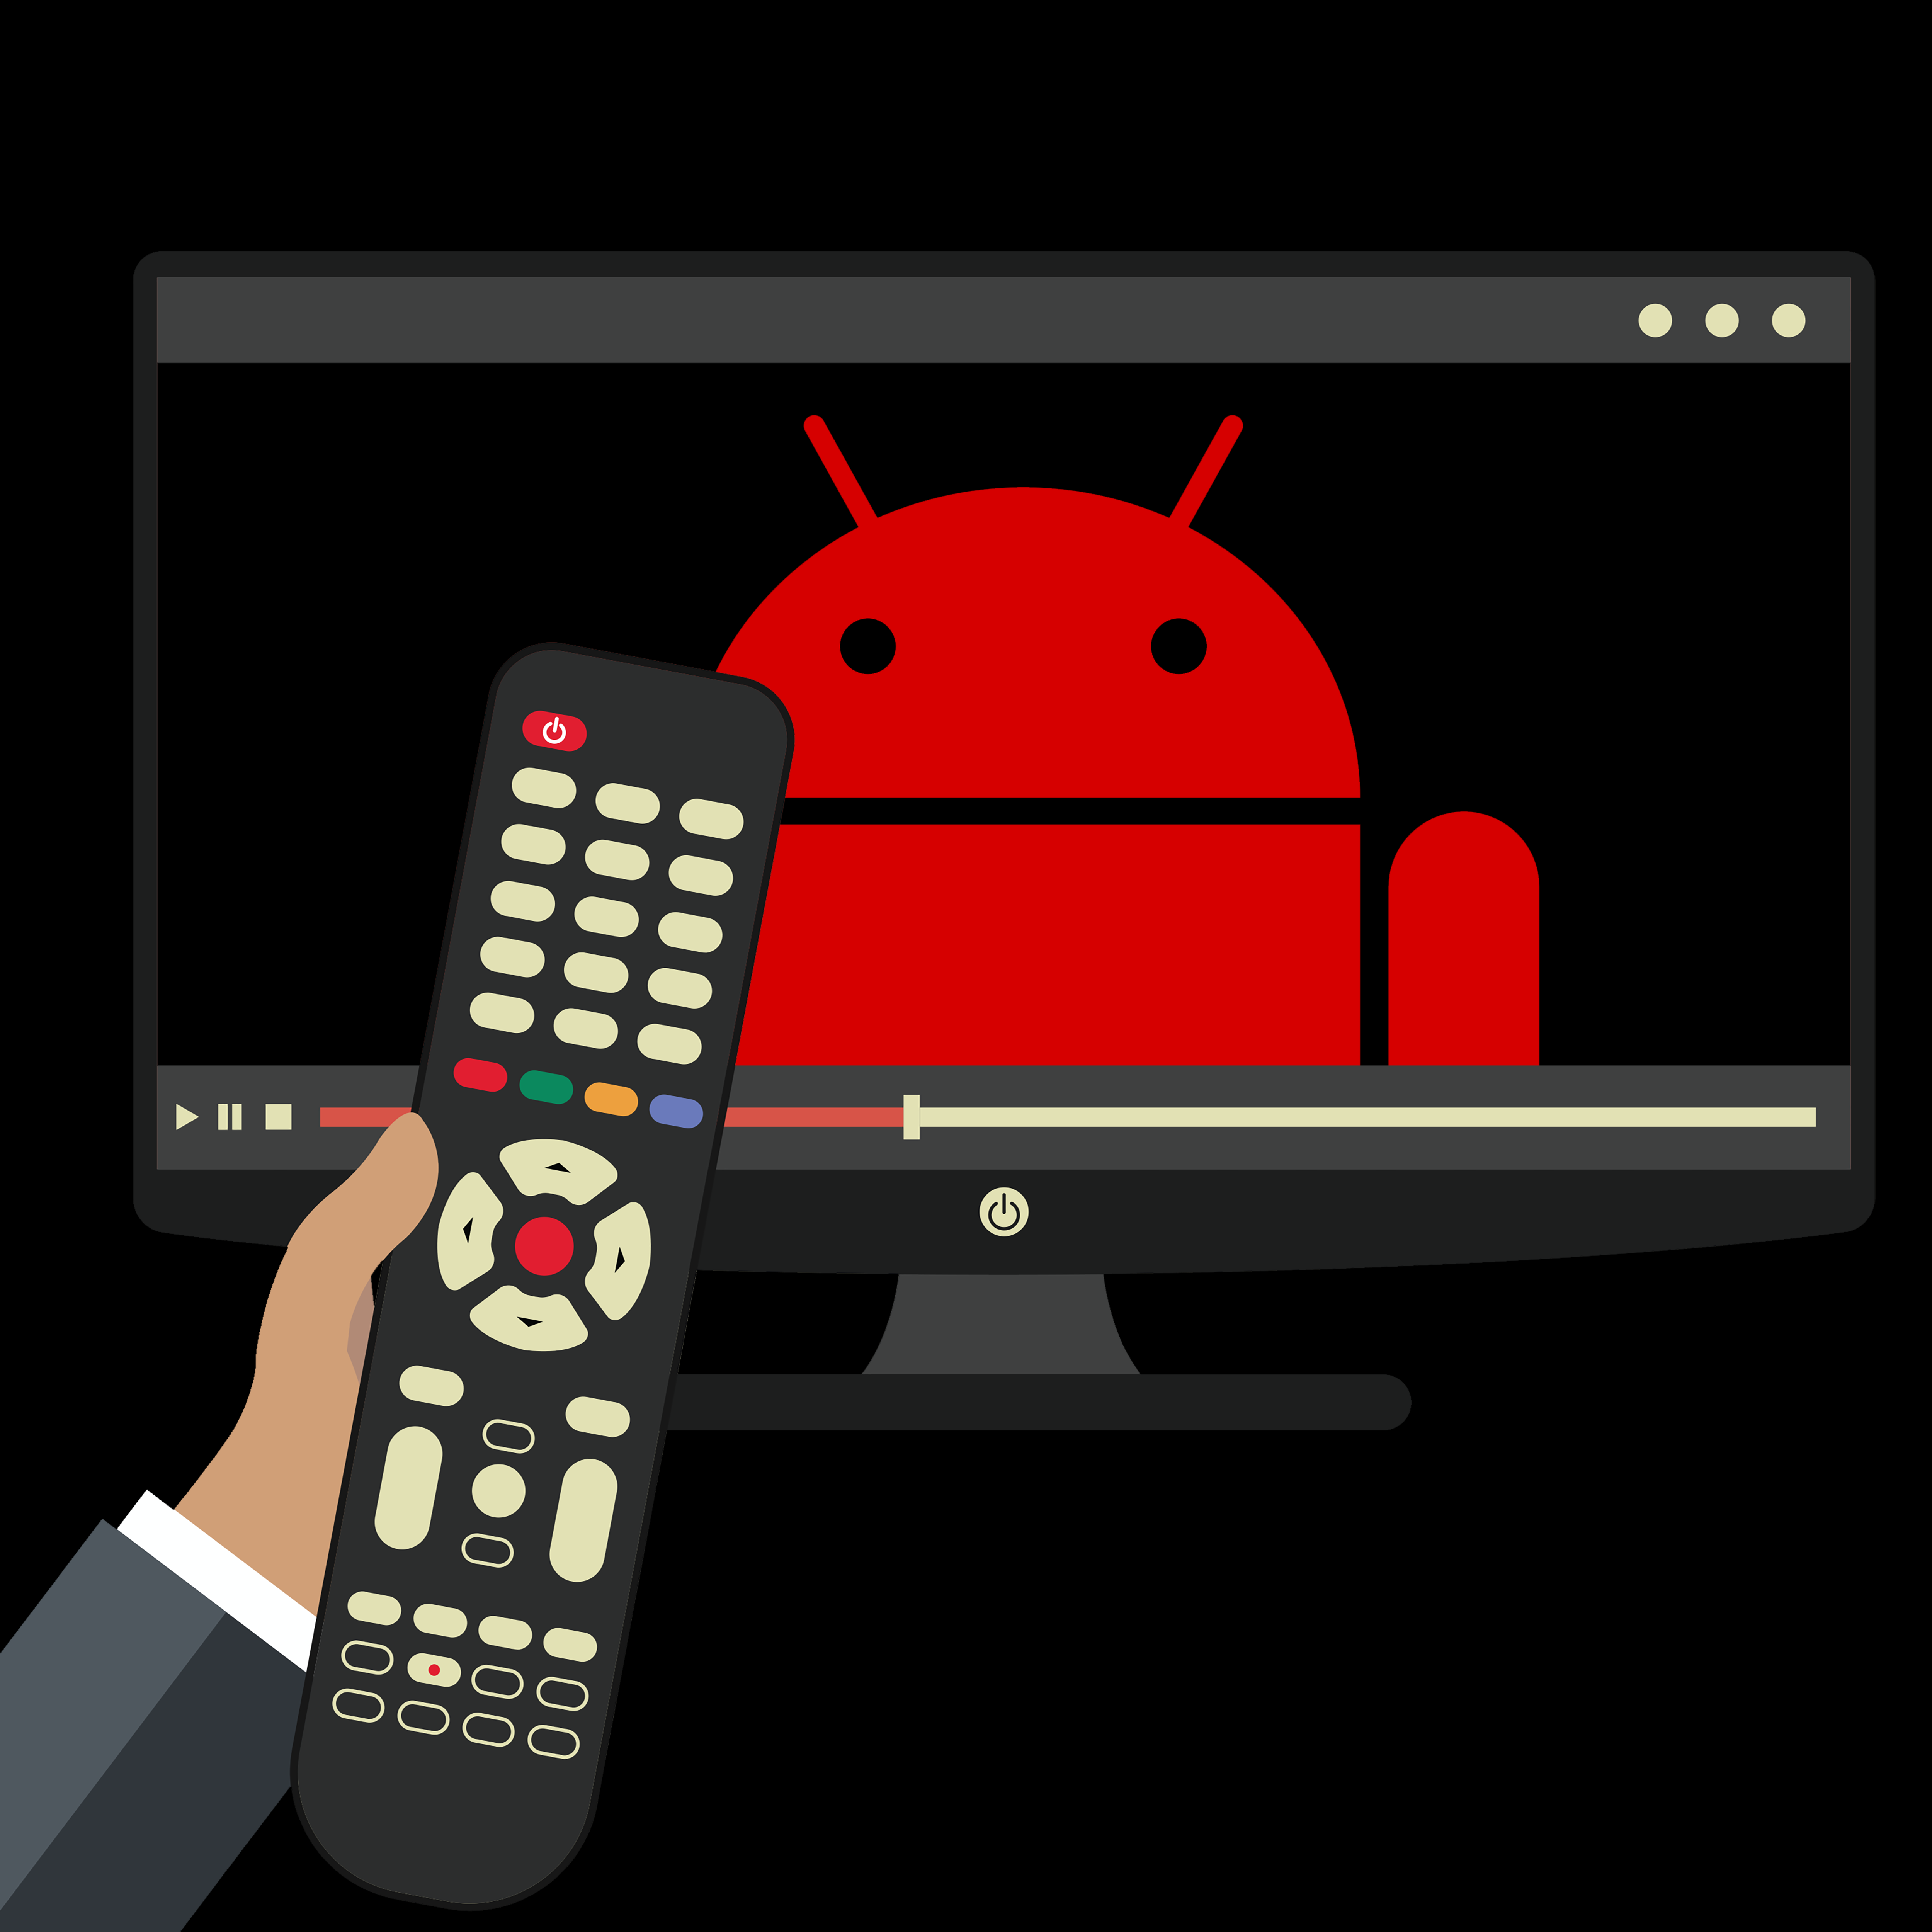 TCL Android TV Vulnerability L